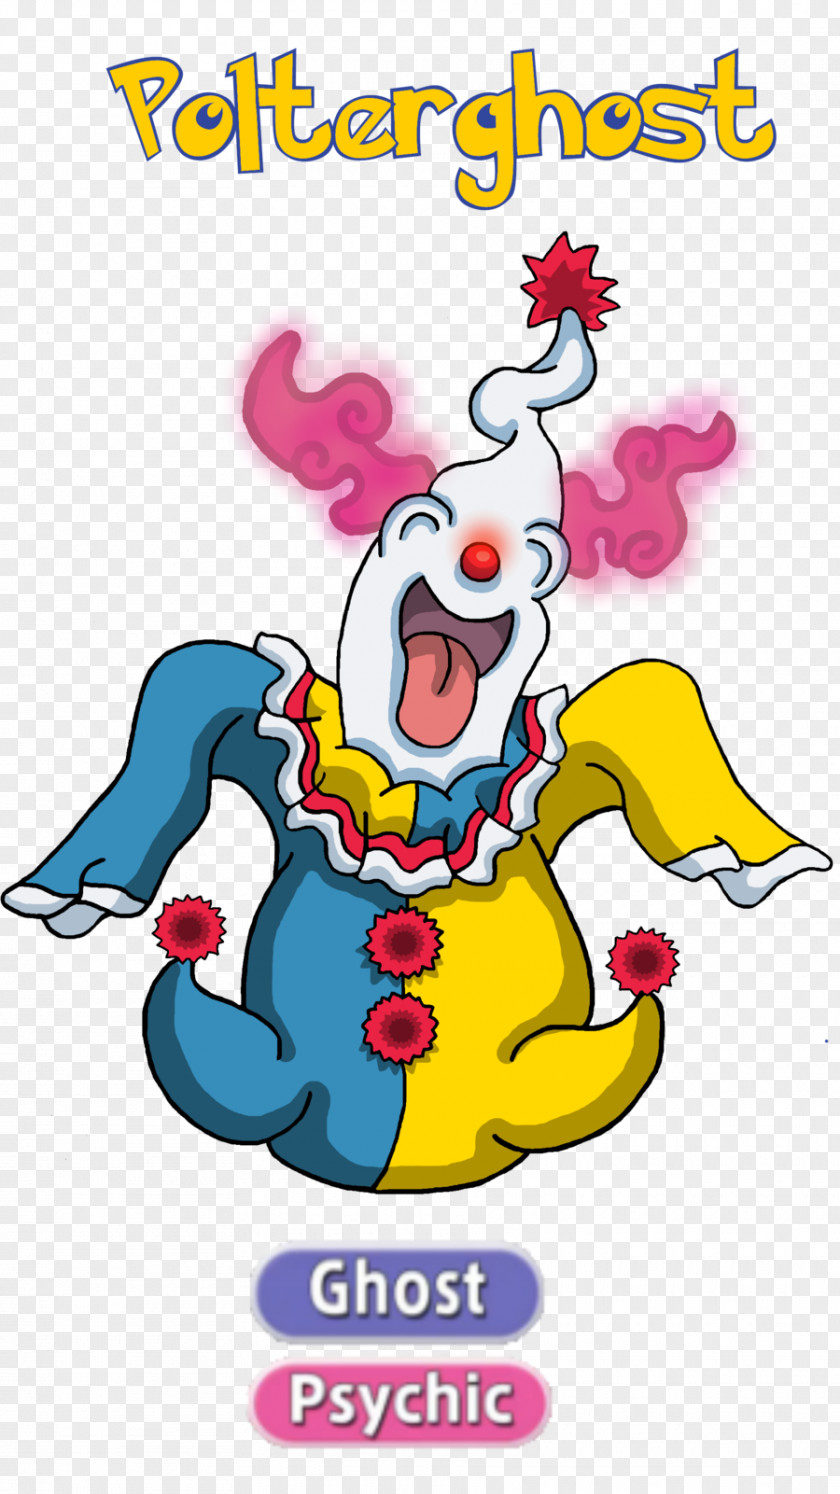 Clown Evil Mr. Mime Jack-in-the-box PNG